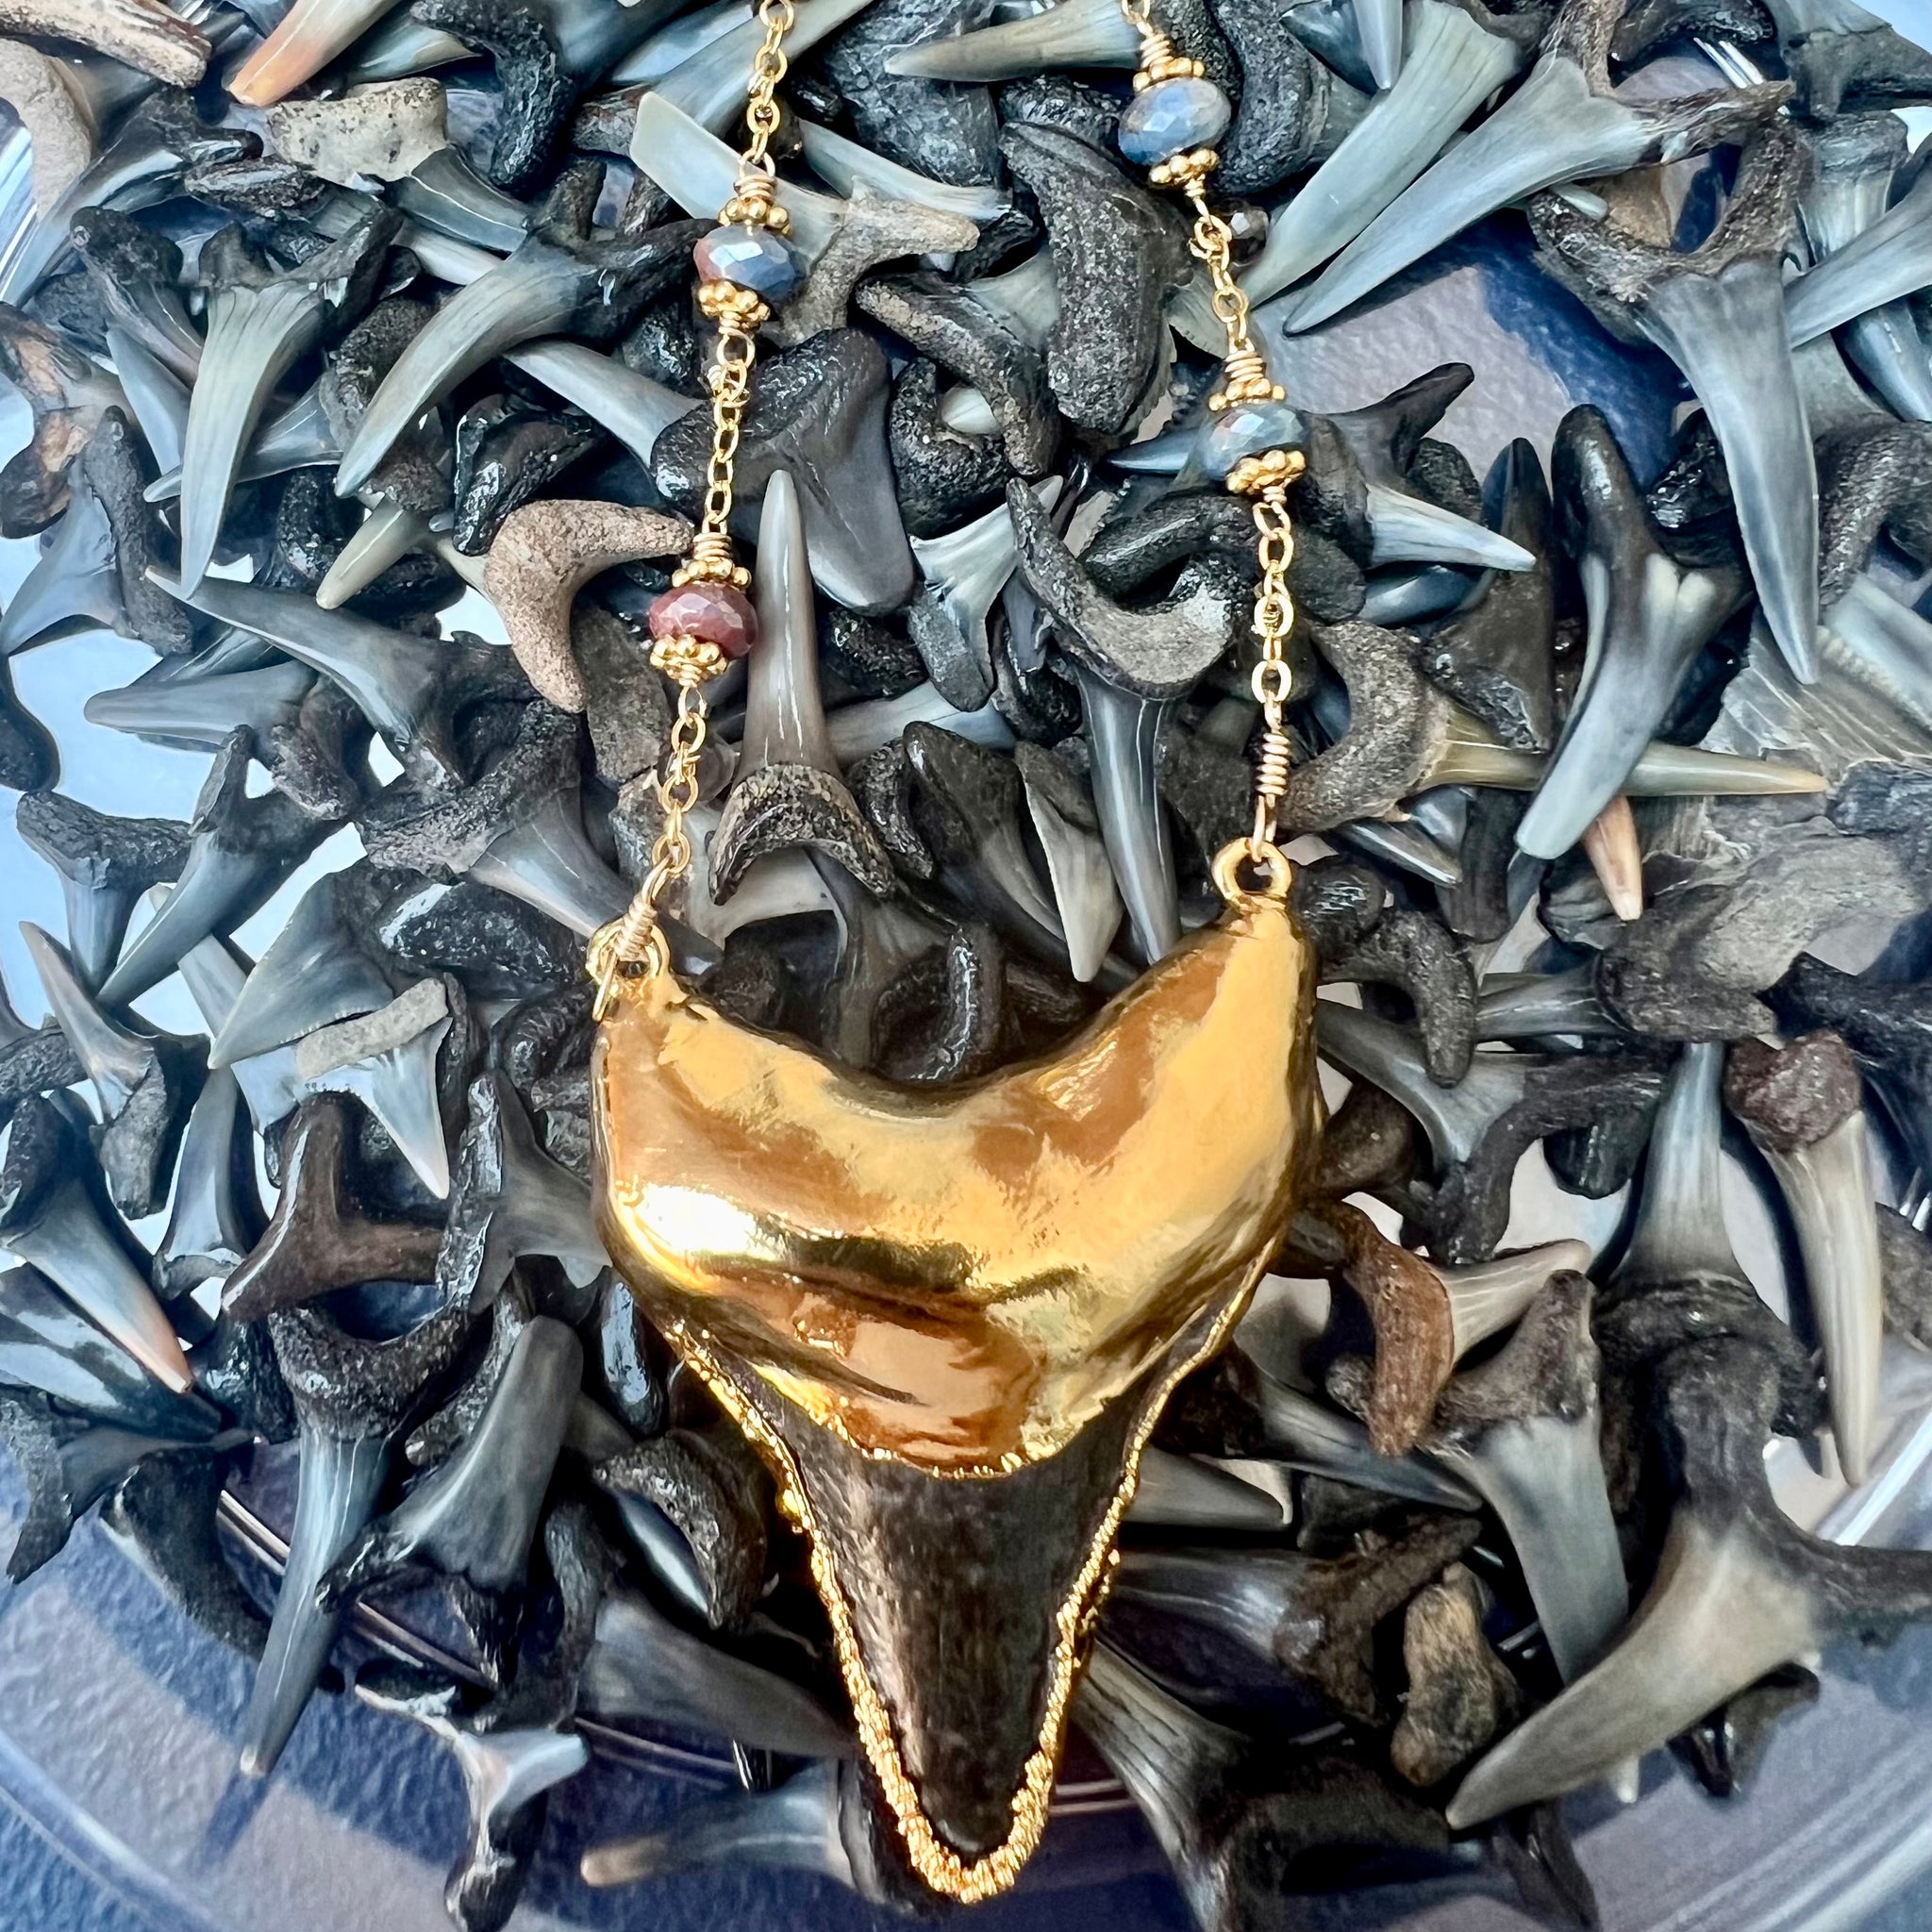 1547 - One of a Kind Shark Tooth and Gemstone Necklace